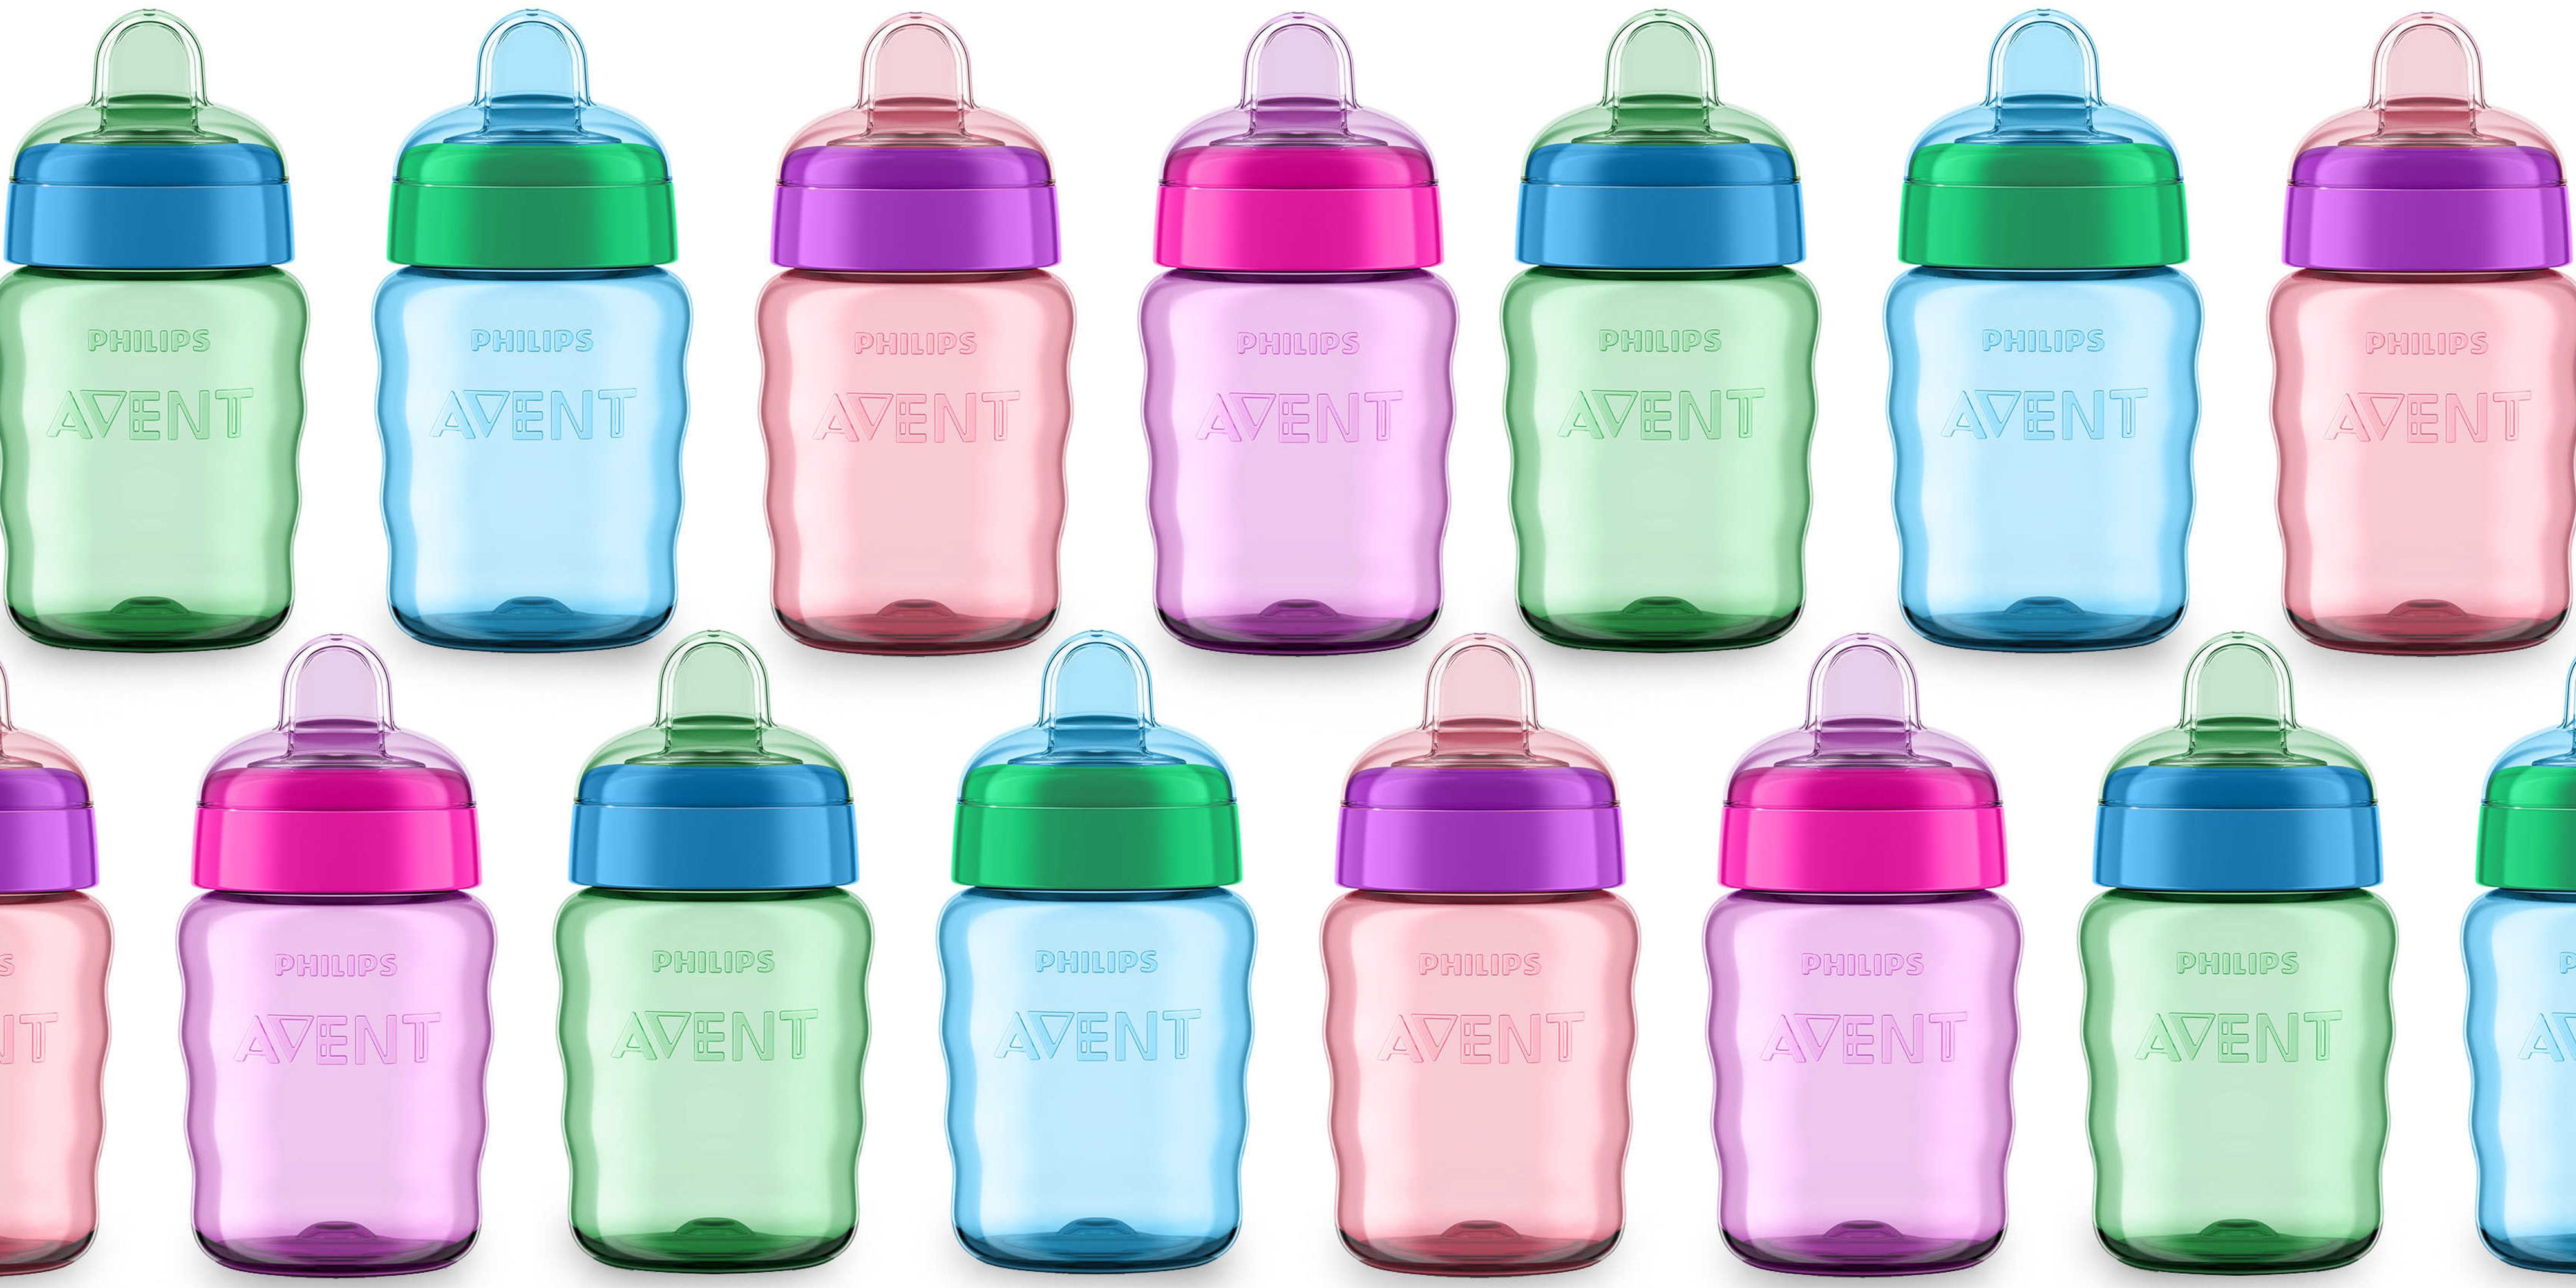 Take and Toss Spill-Proof Kid Baby Toddler Travel Sippy Cups BPA Free - NEW